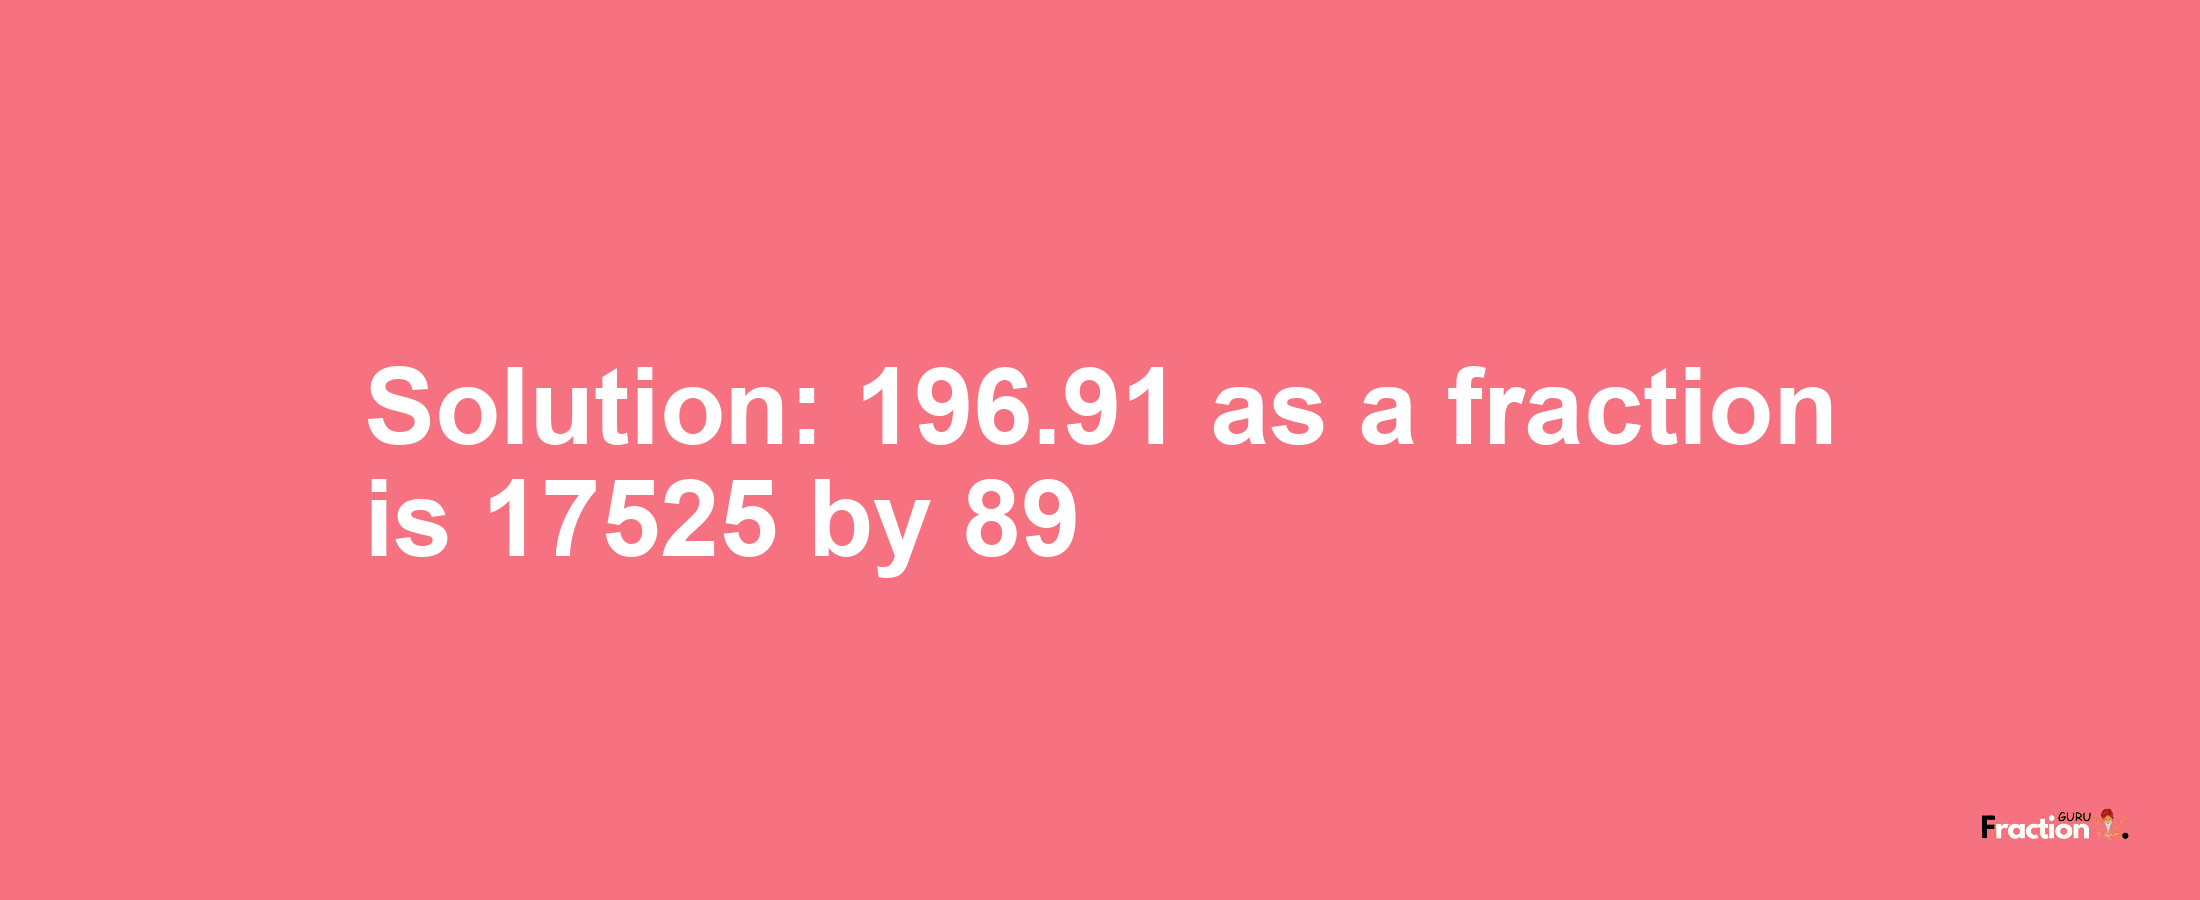 Solution:196.91 as a fraction is 17525/89